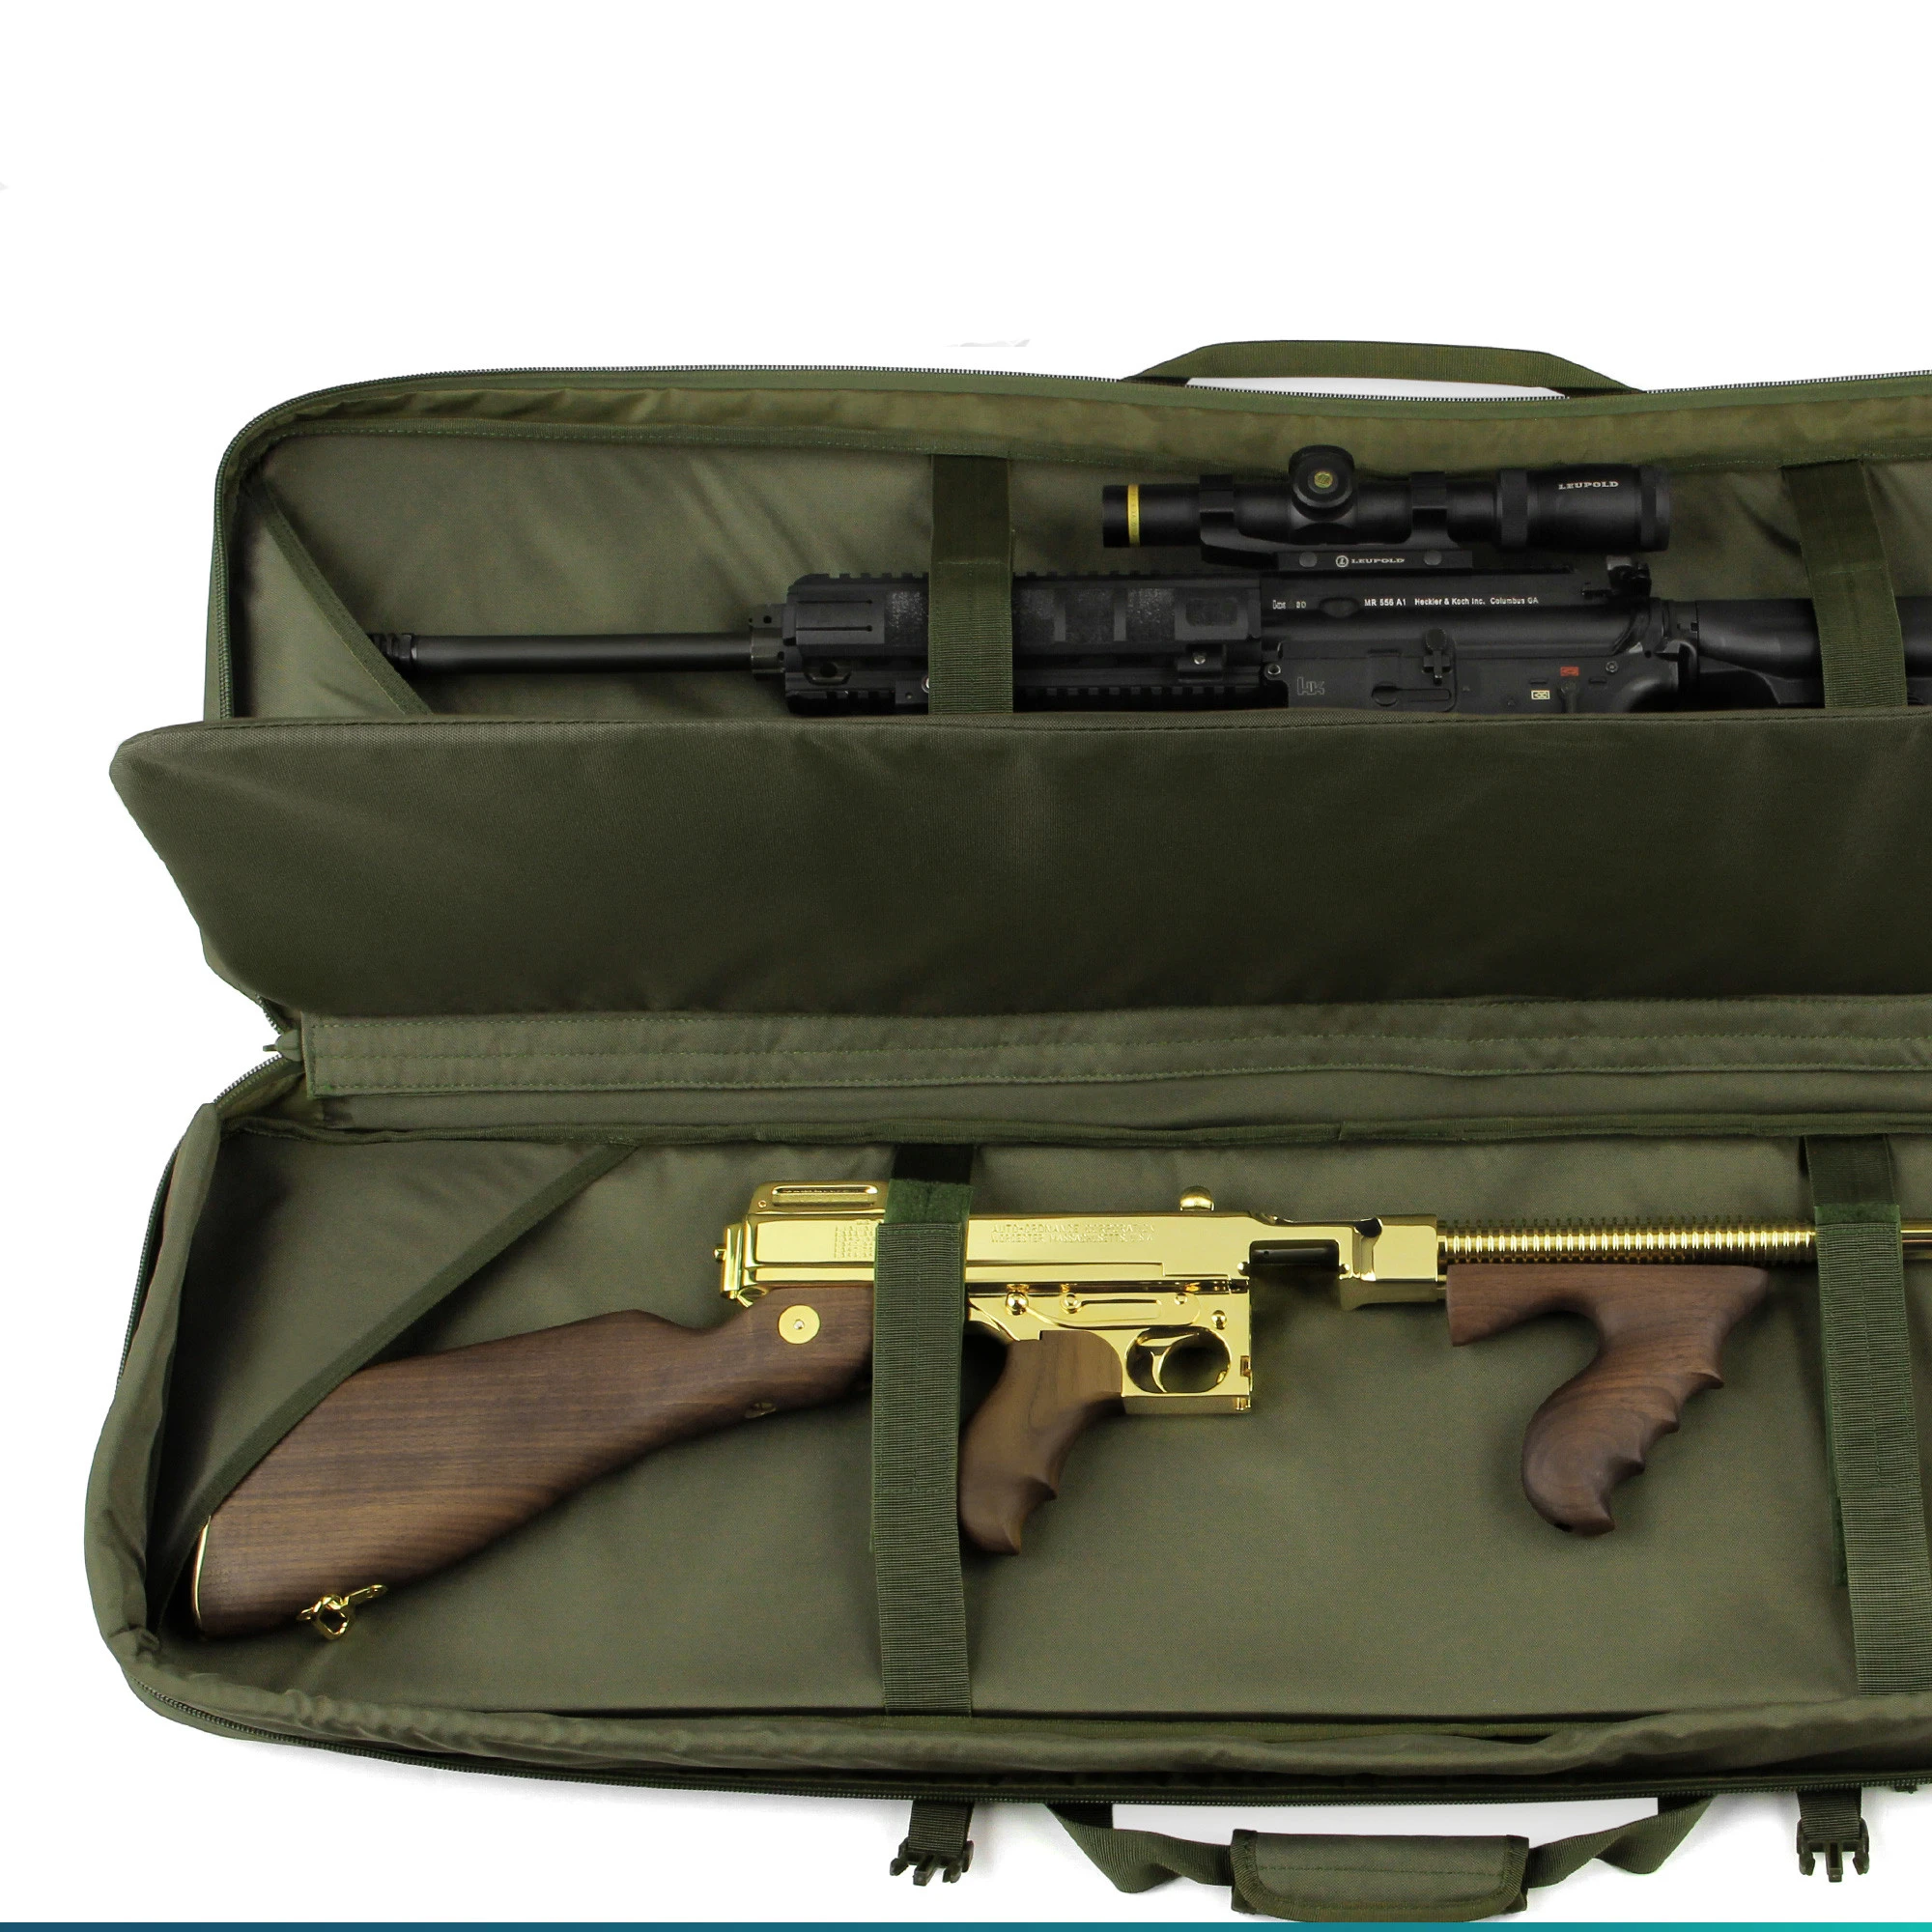 OEM Carry handle hunting military tactical rifle gun case gun bag for pistols and rifle